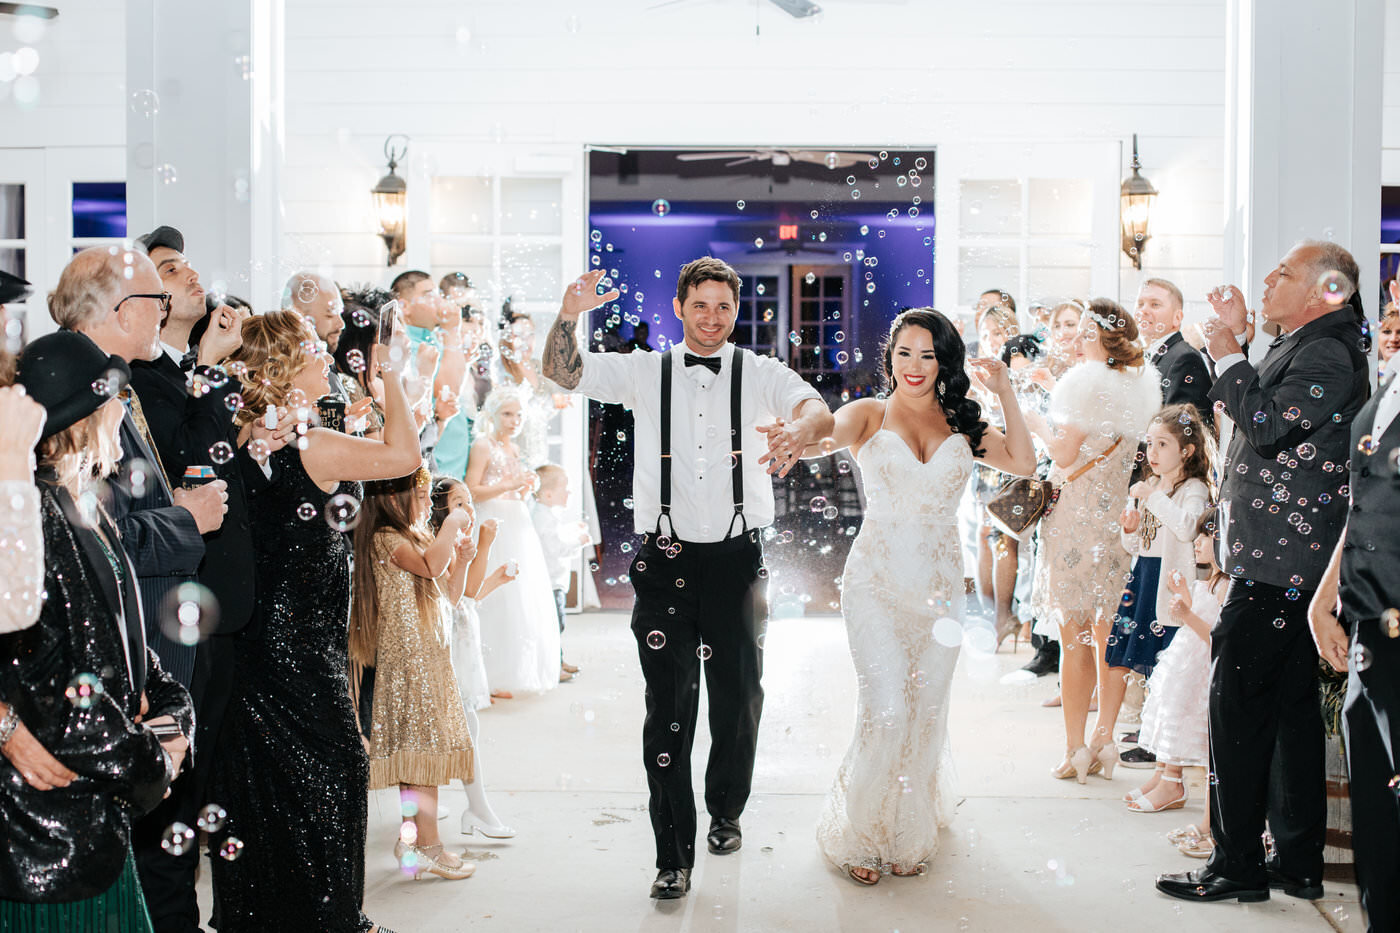 A bride and groom make their grand exit following their Kendall Point wedding.